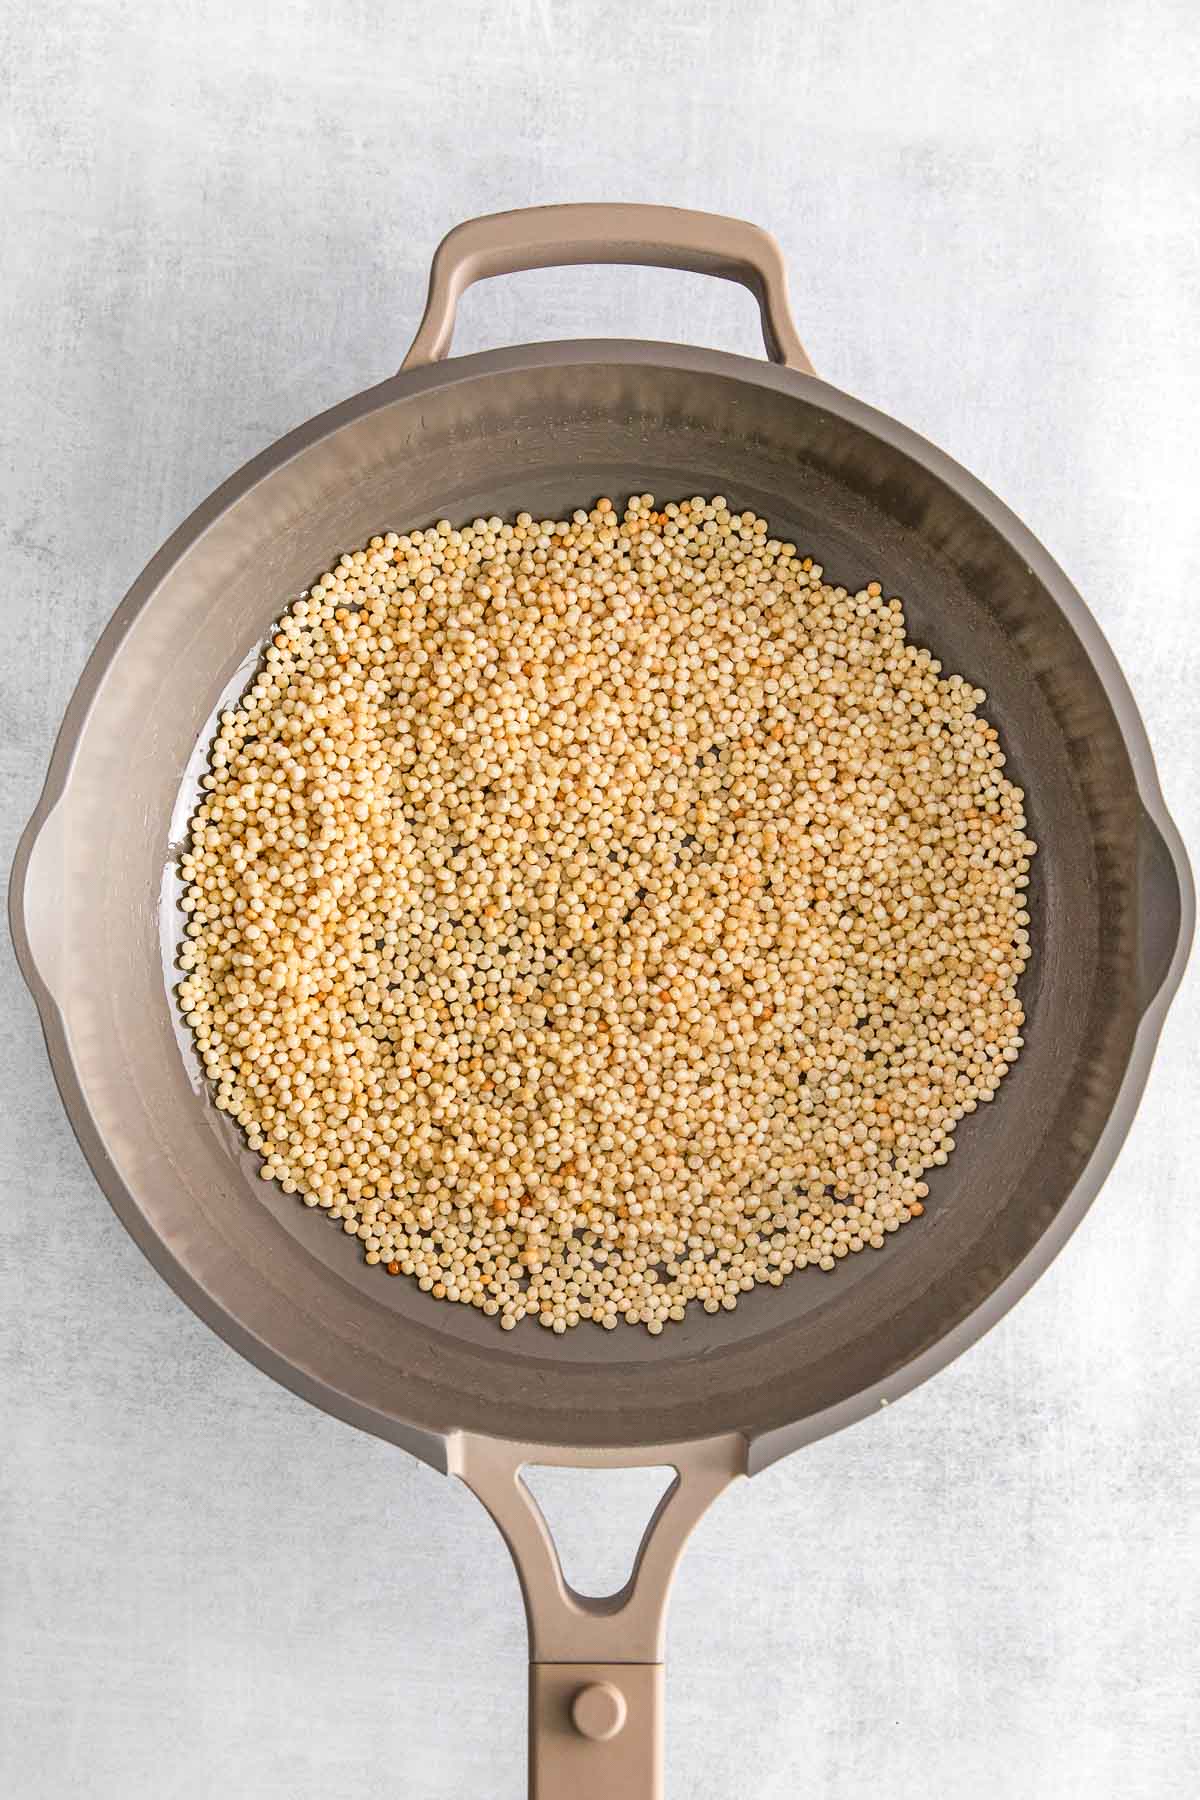 Couscous in a large skillet.